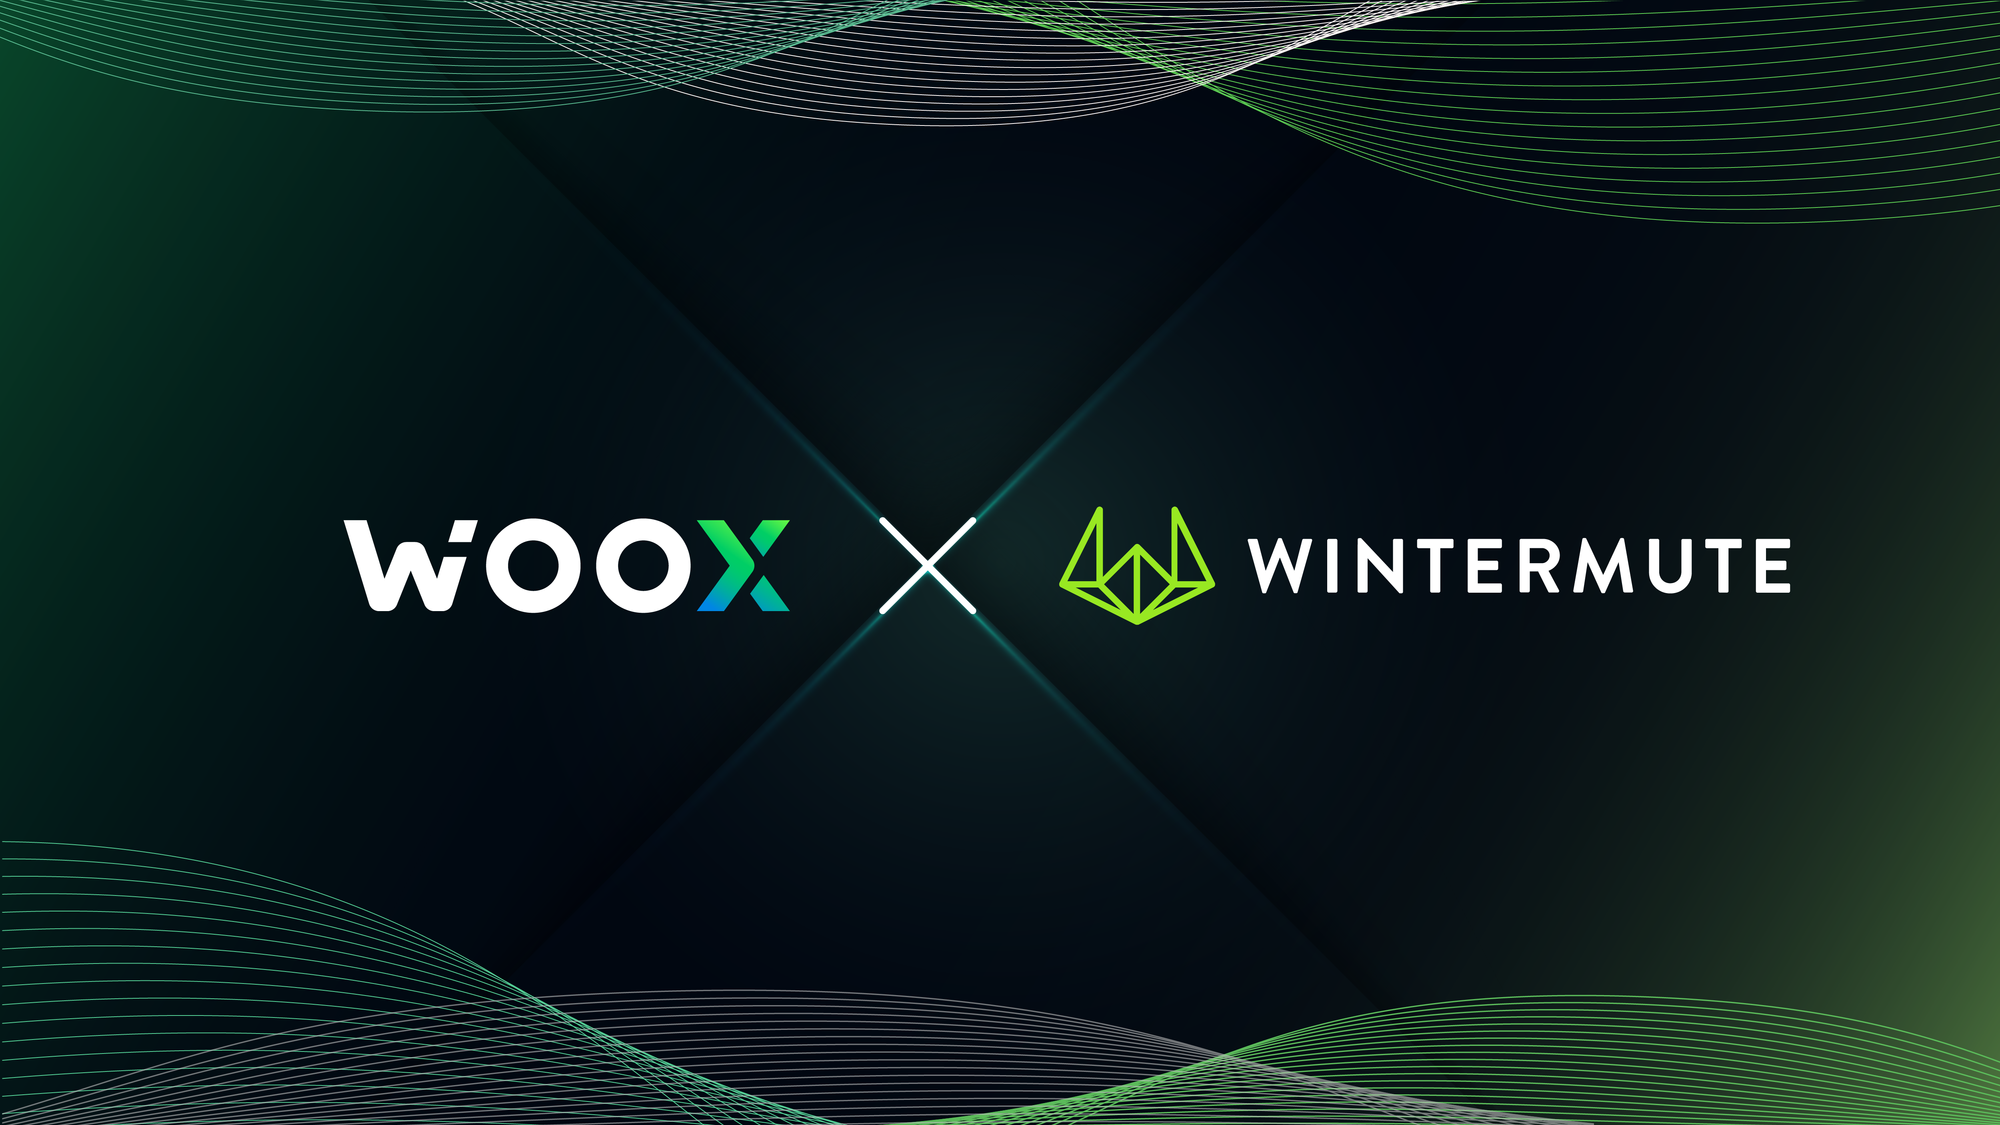 WOO X partners with leading crypto liquidity provider Wintermute to increase liquidity